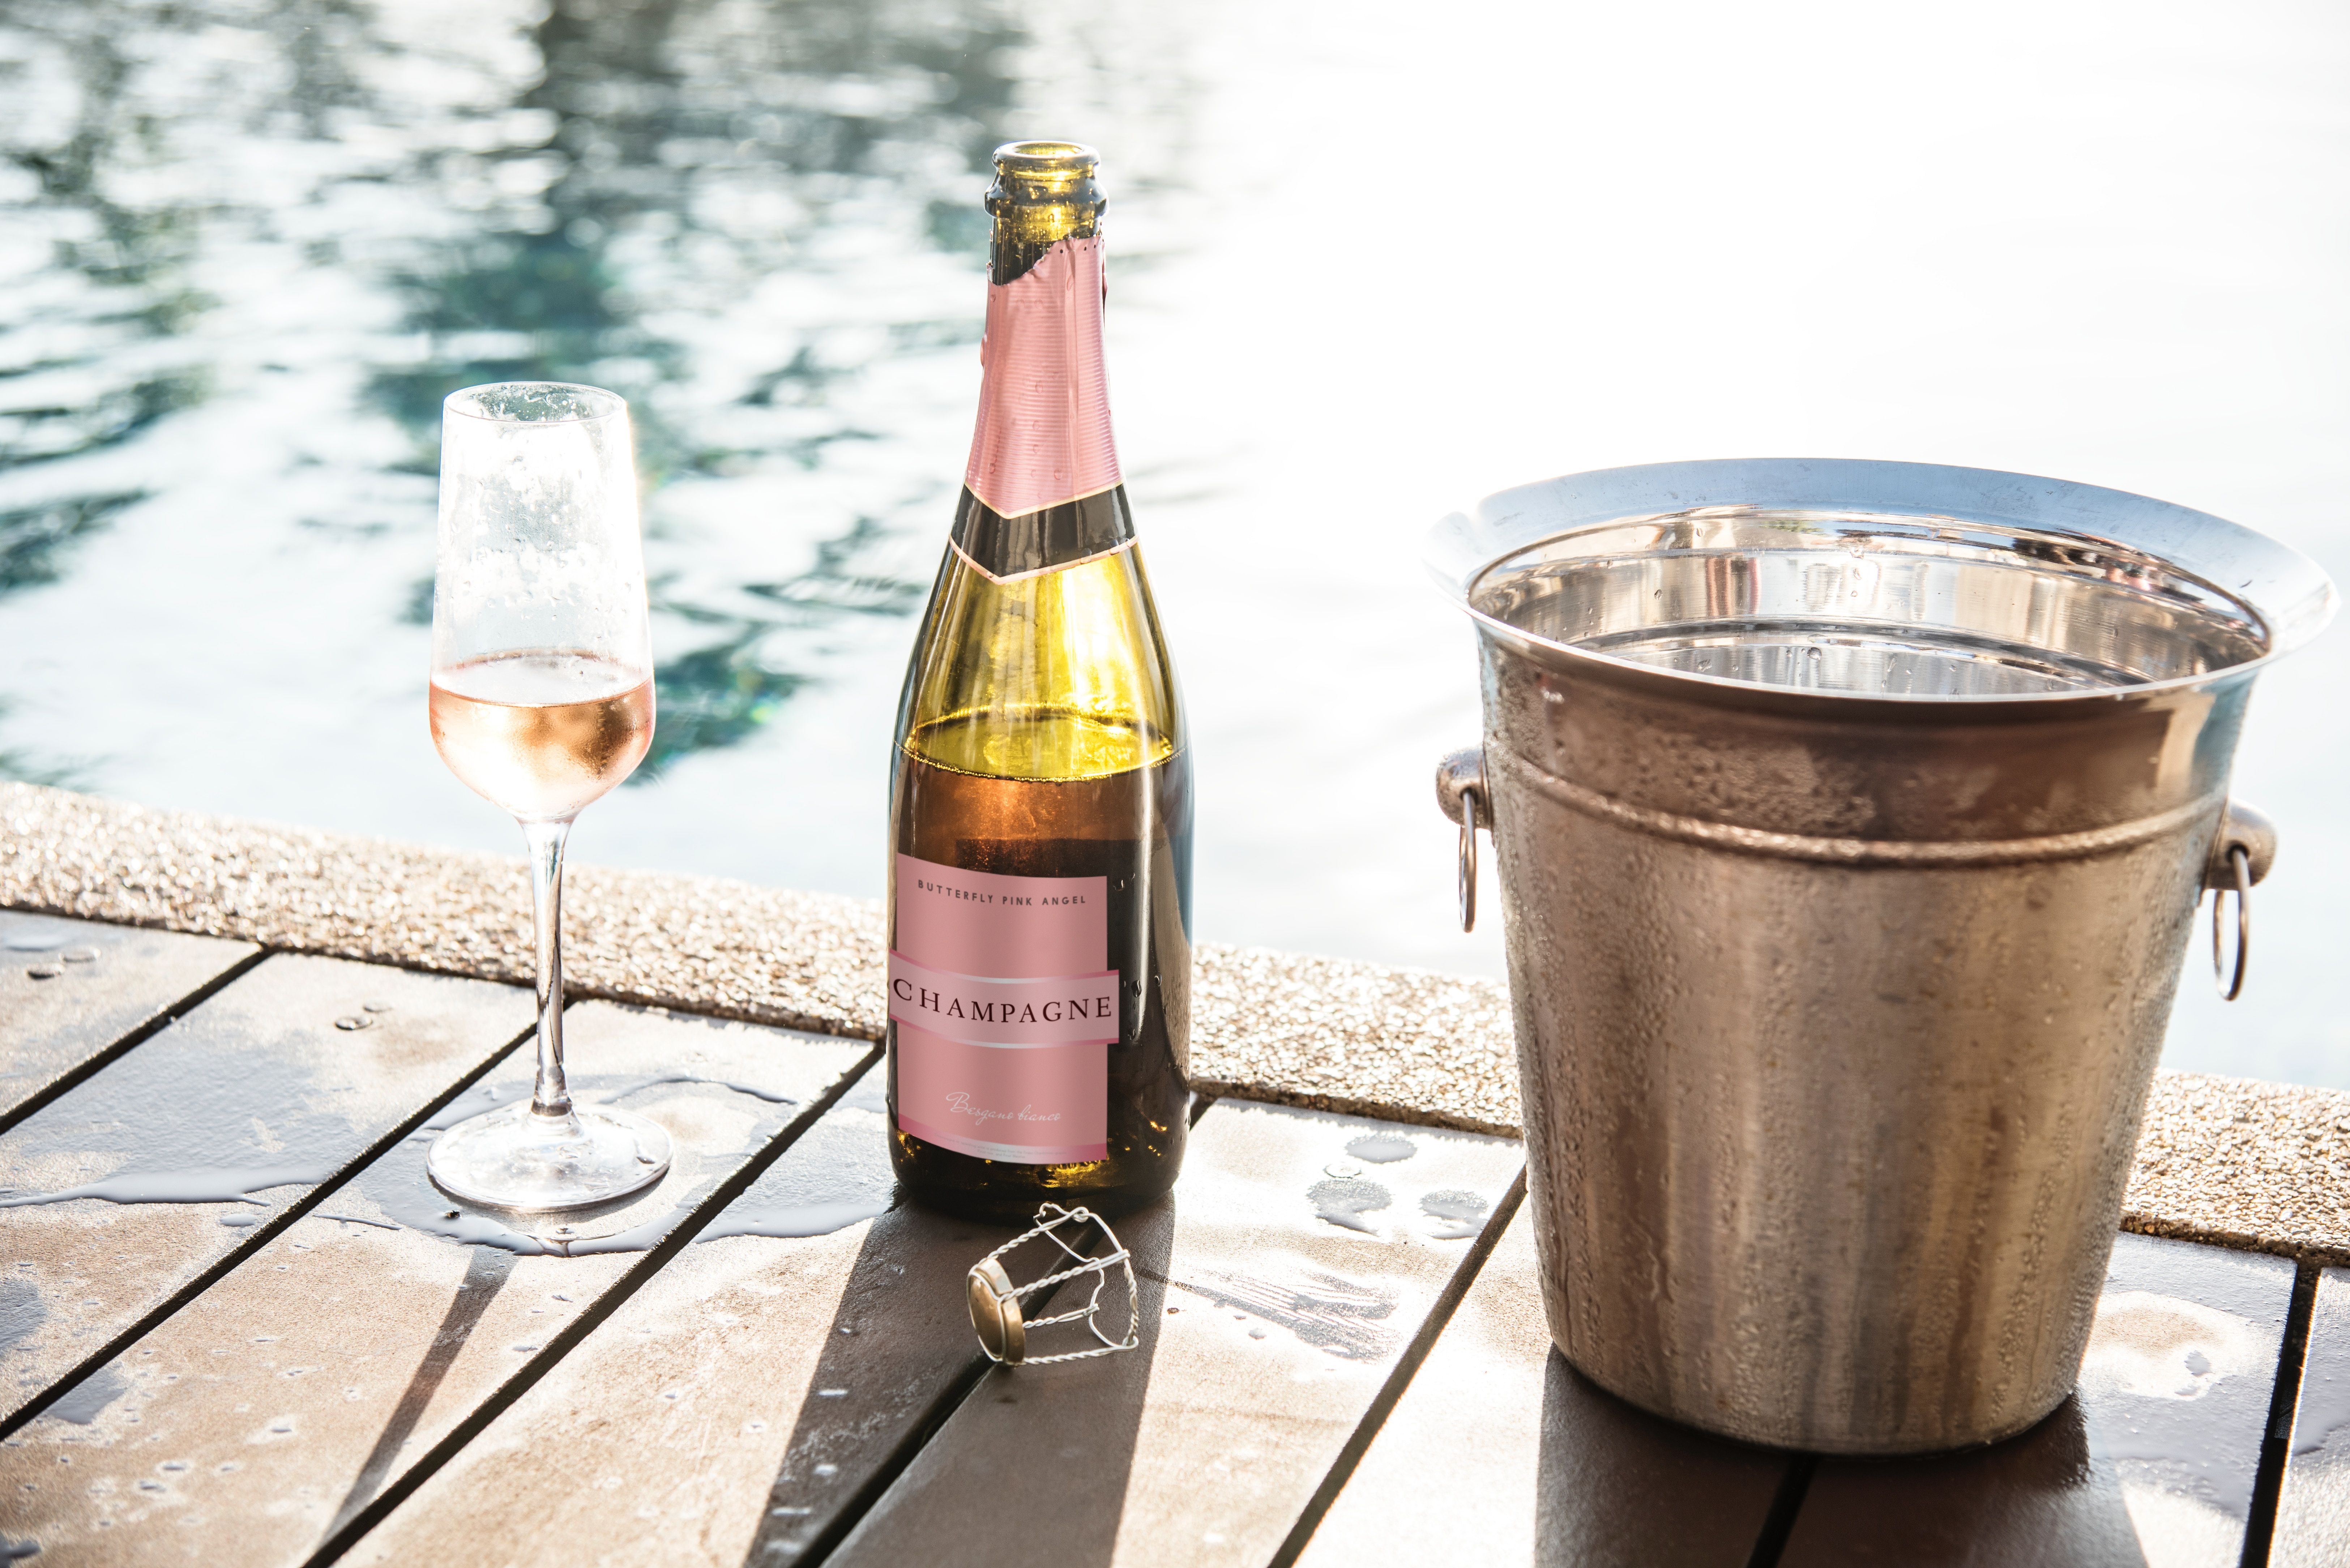 A bottle of champagne sits next to a bucket of ice and a glass of champagne. - Champagne